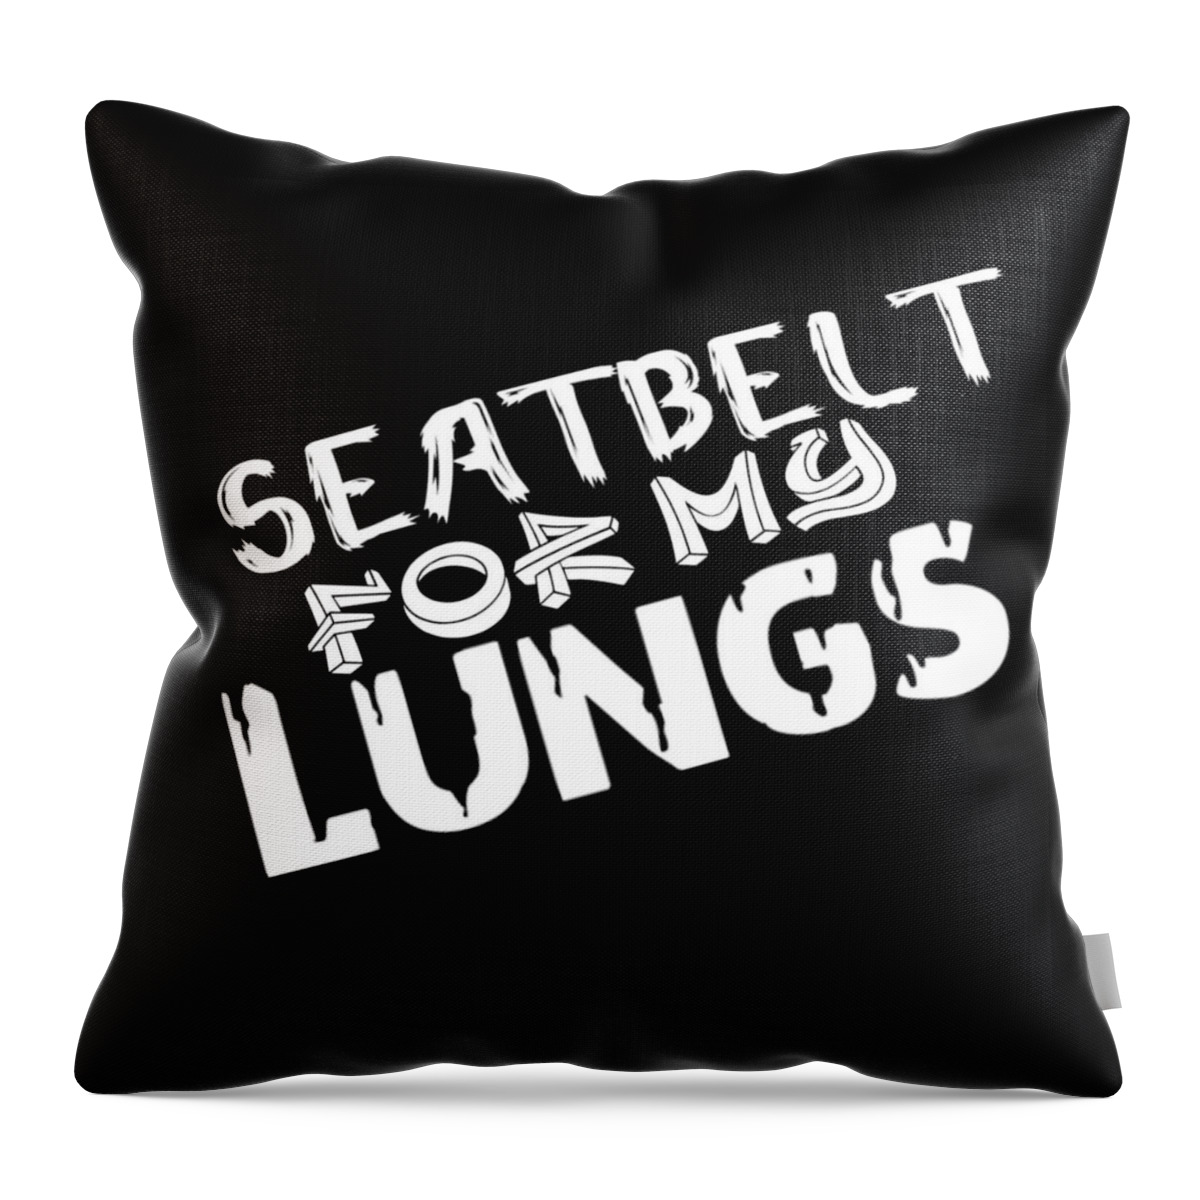  Throw Pillow featuring the digital art Seatbelt For My Lungs by Tony Camm